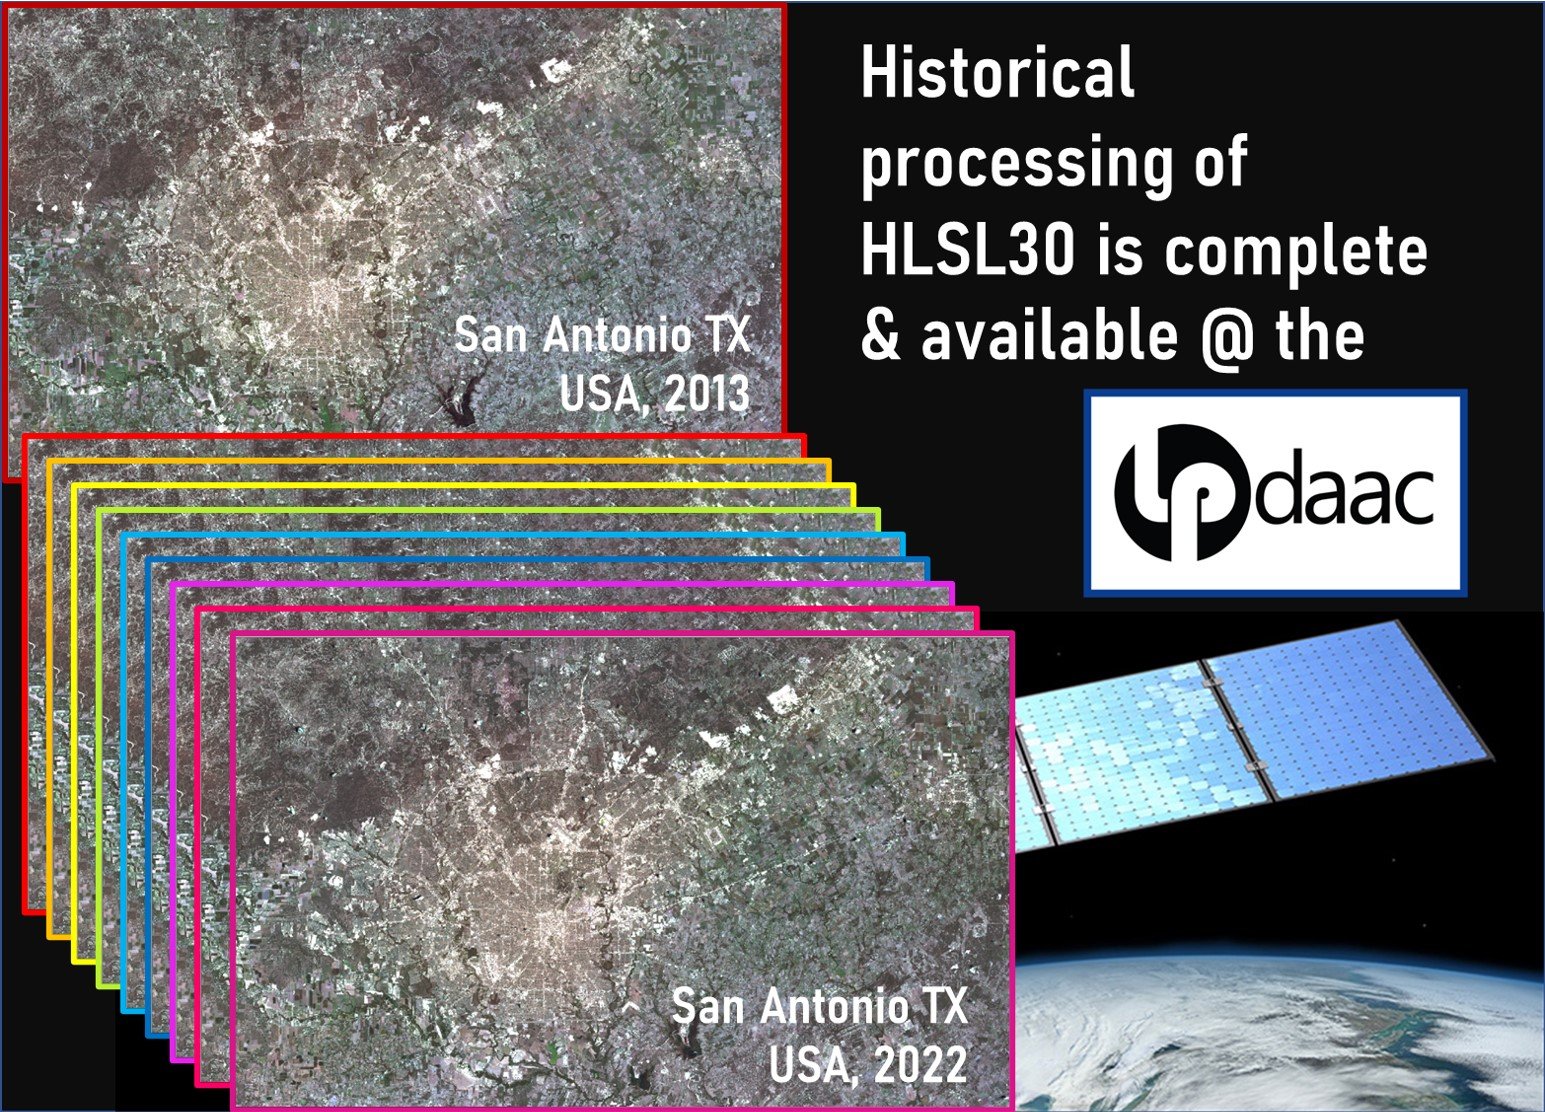 Image is a cascading data stack of HLS imagery over San Antonio, Texas from 2003 to 2022 with outer space background and satellite.